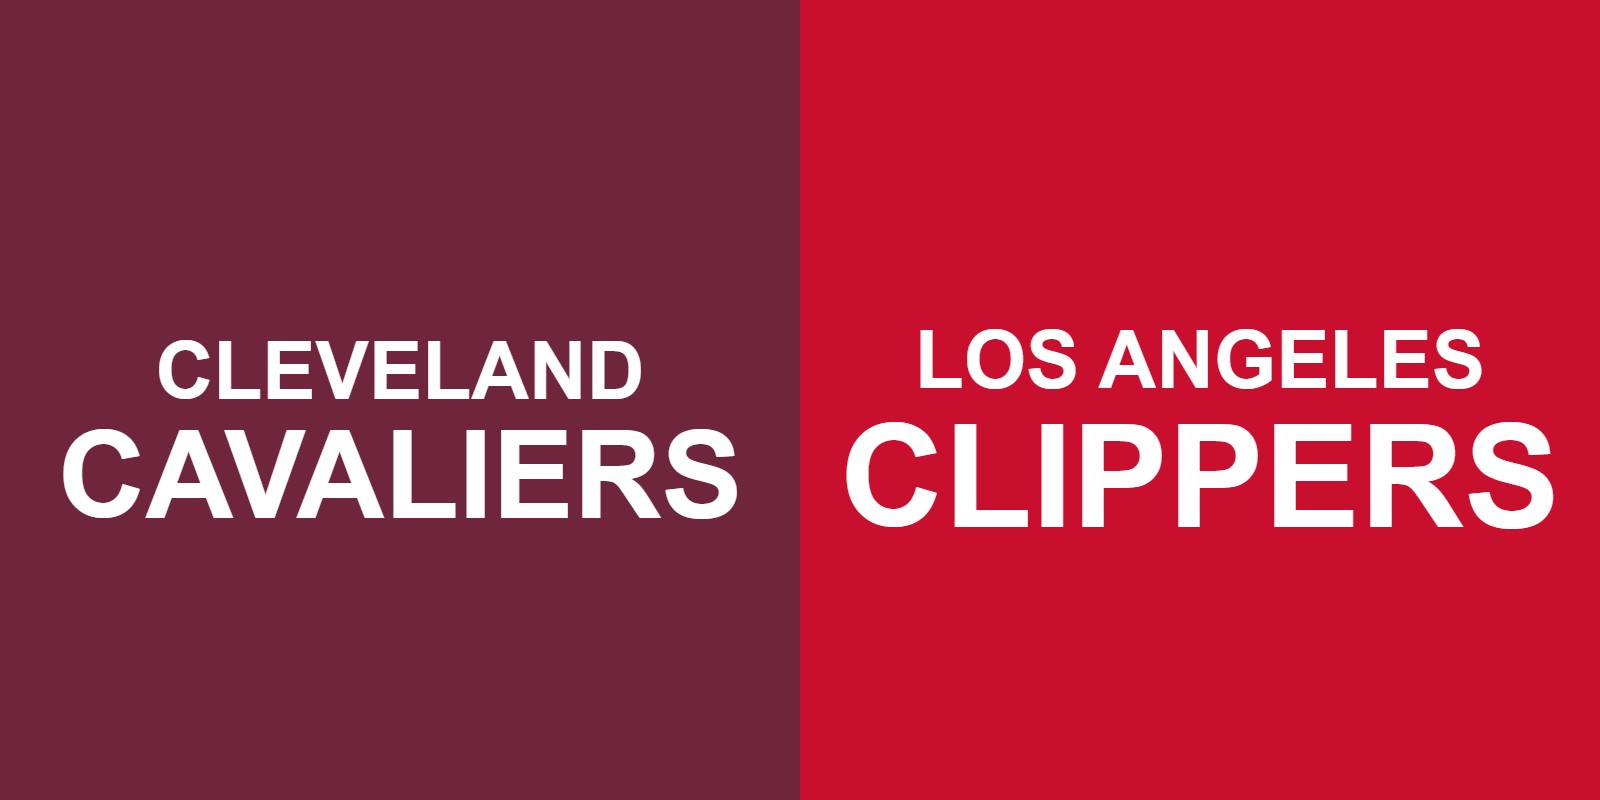 Cavaliers vs Clippers